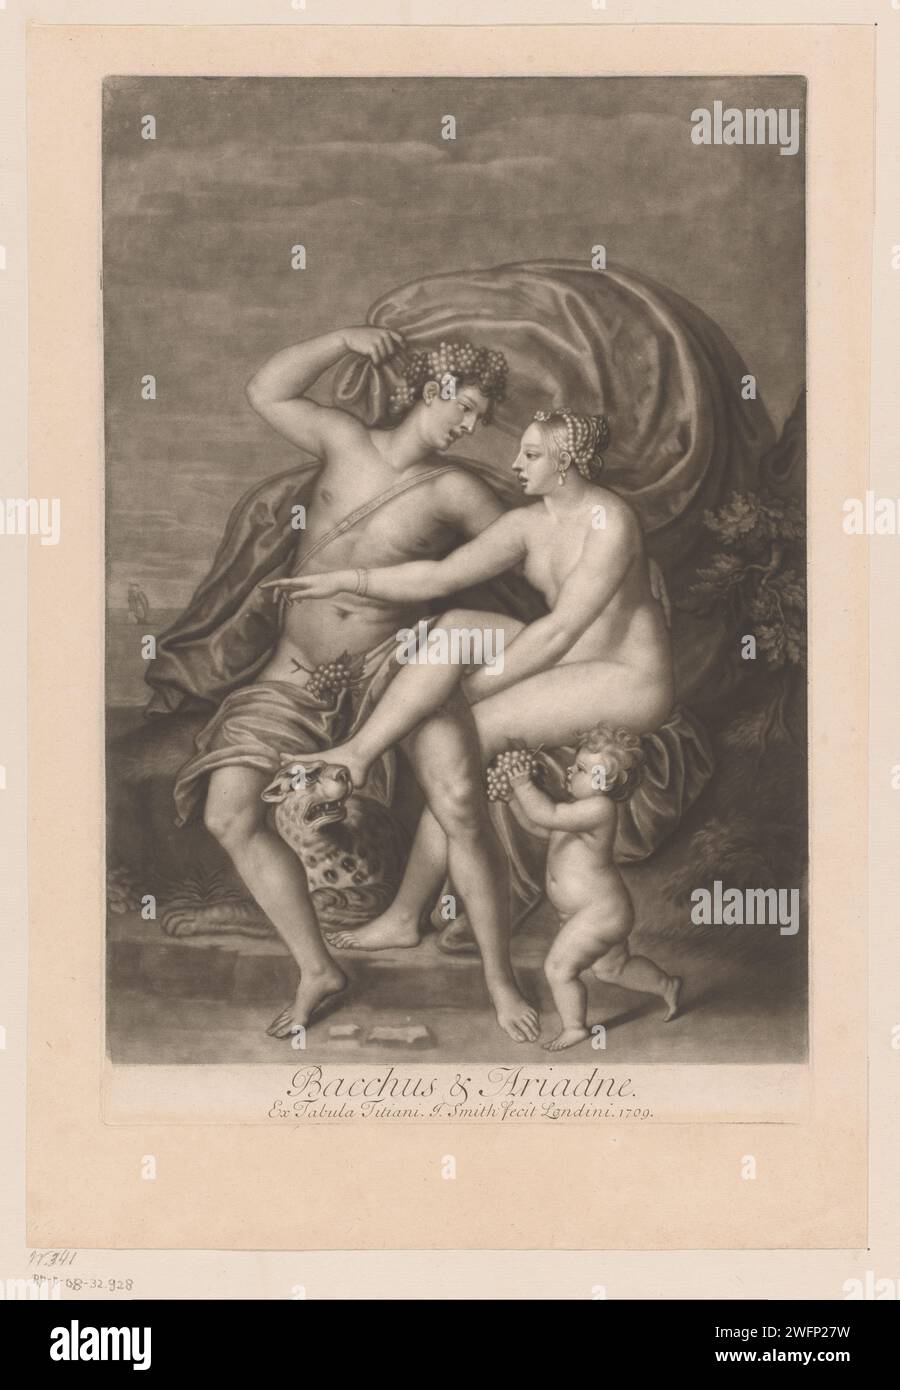 Bacchus finds Ariadne on Naxos, John Smith (print maker/ publisher), after Giovanni Jacopo Caraglio, After Perino del Vaga, After Titian, 1709 print  London paper  Bacchus finds Ariadne on Naxos Stock Photo